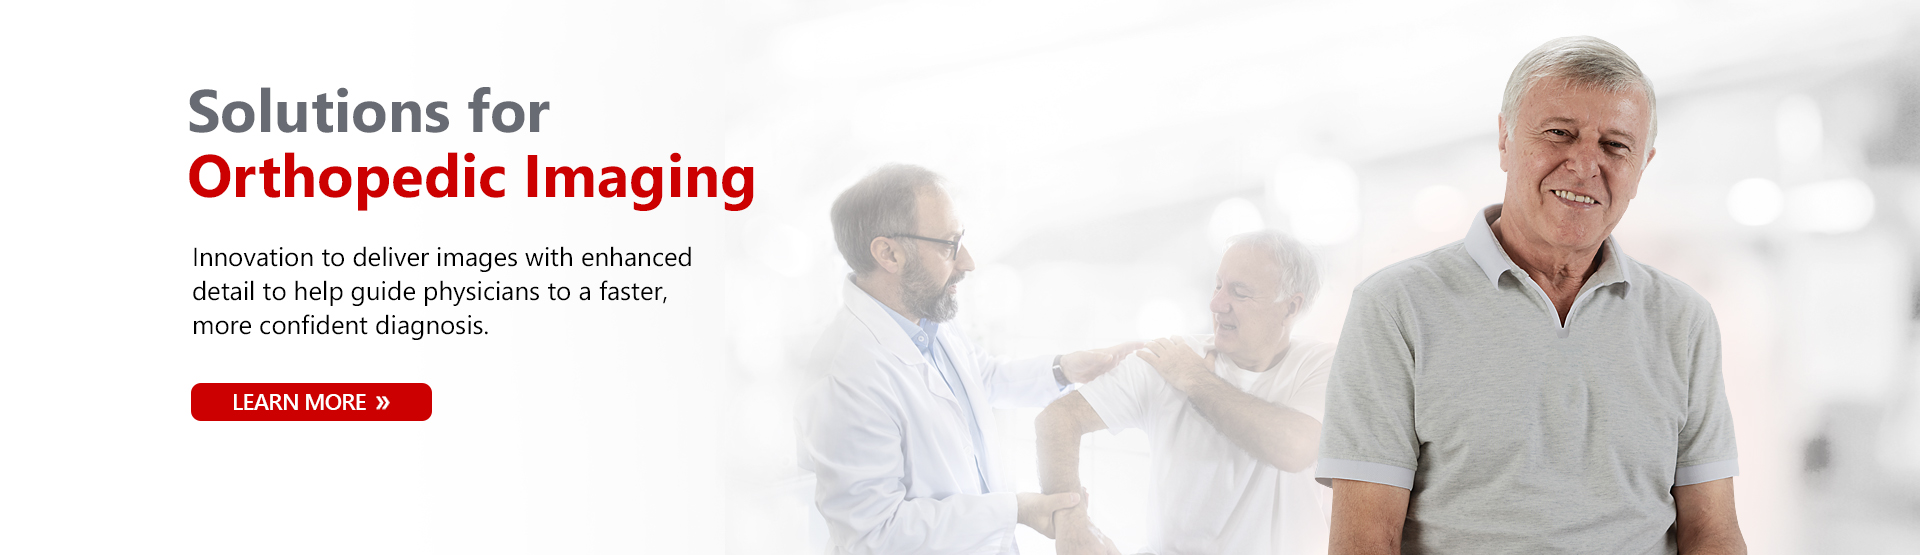 Solutions for Orthopedic Imaging | Innovation to deliver images with enhanced detail to help guide physicians to a faster, more confident diagnosis. | Learn More